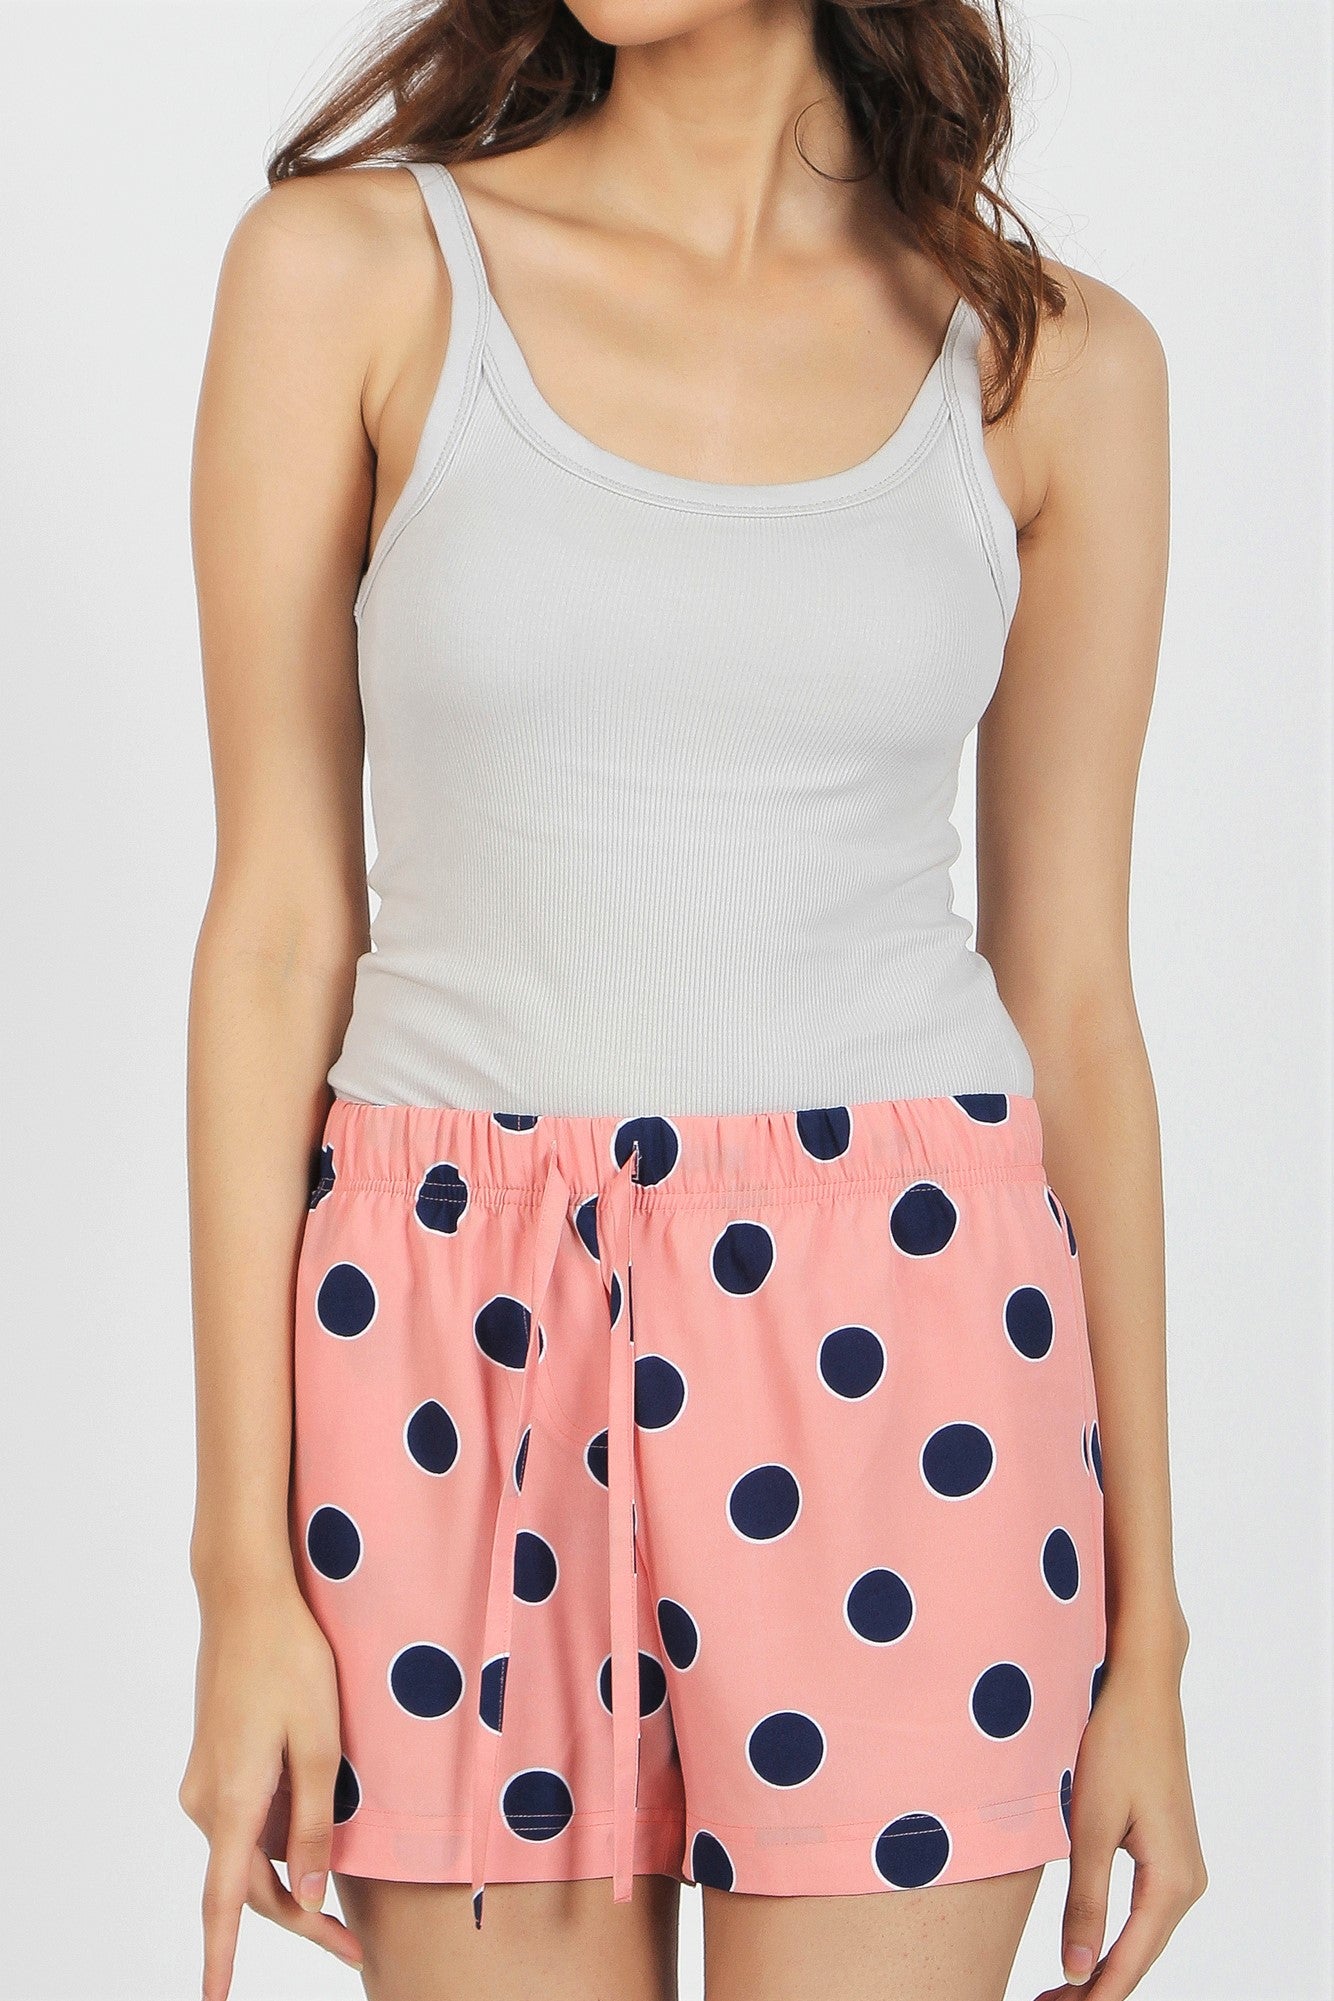 Women's Crepe Shorts Combo (Pack of 2) - Spiral Rust-Polka Blush